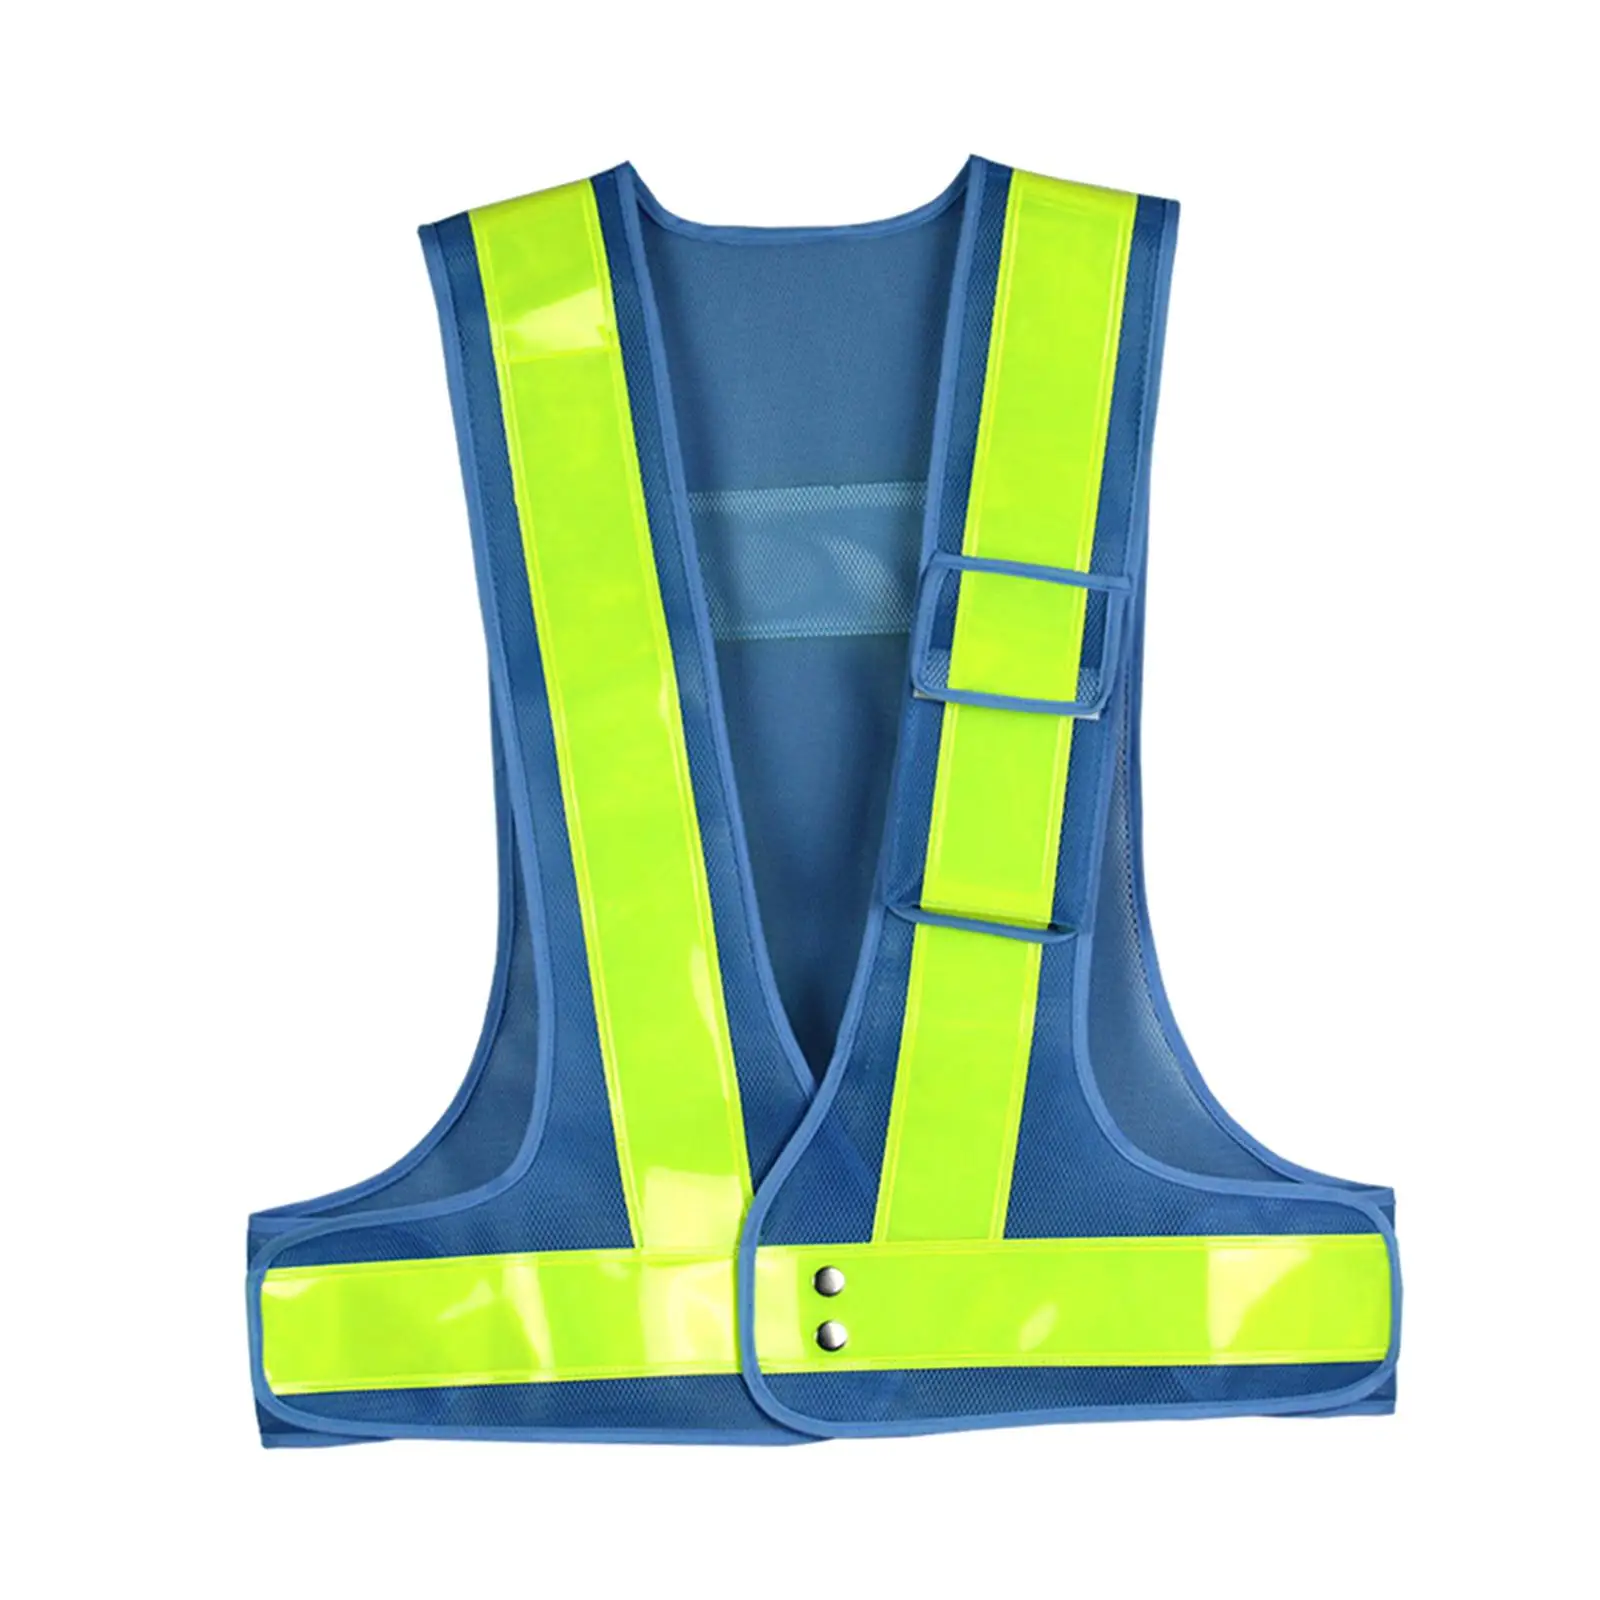 High Visibility Reflective Safety Vest Breathable Reflective Strips for Jogging Worker Construction Crossing Guard Women Men